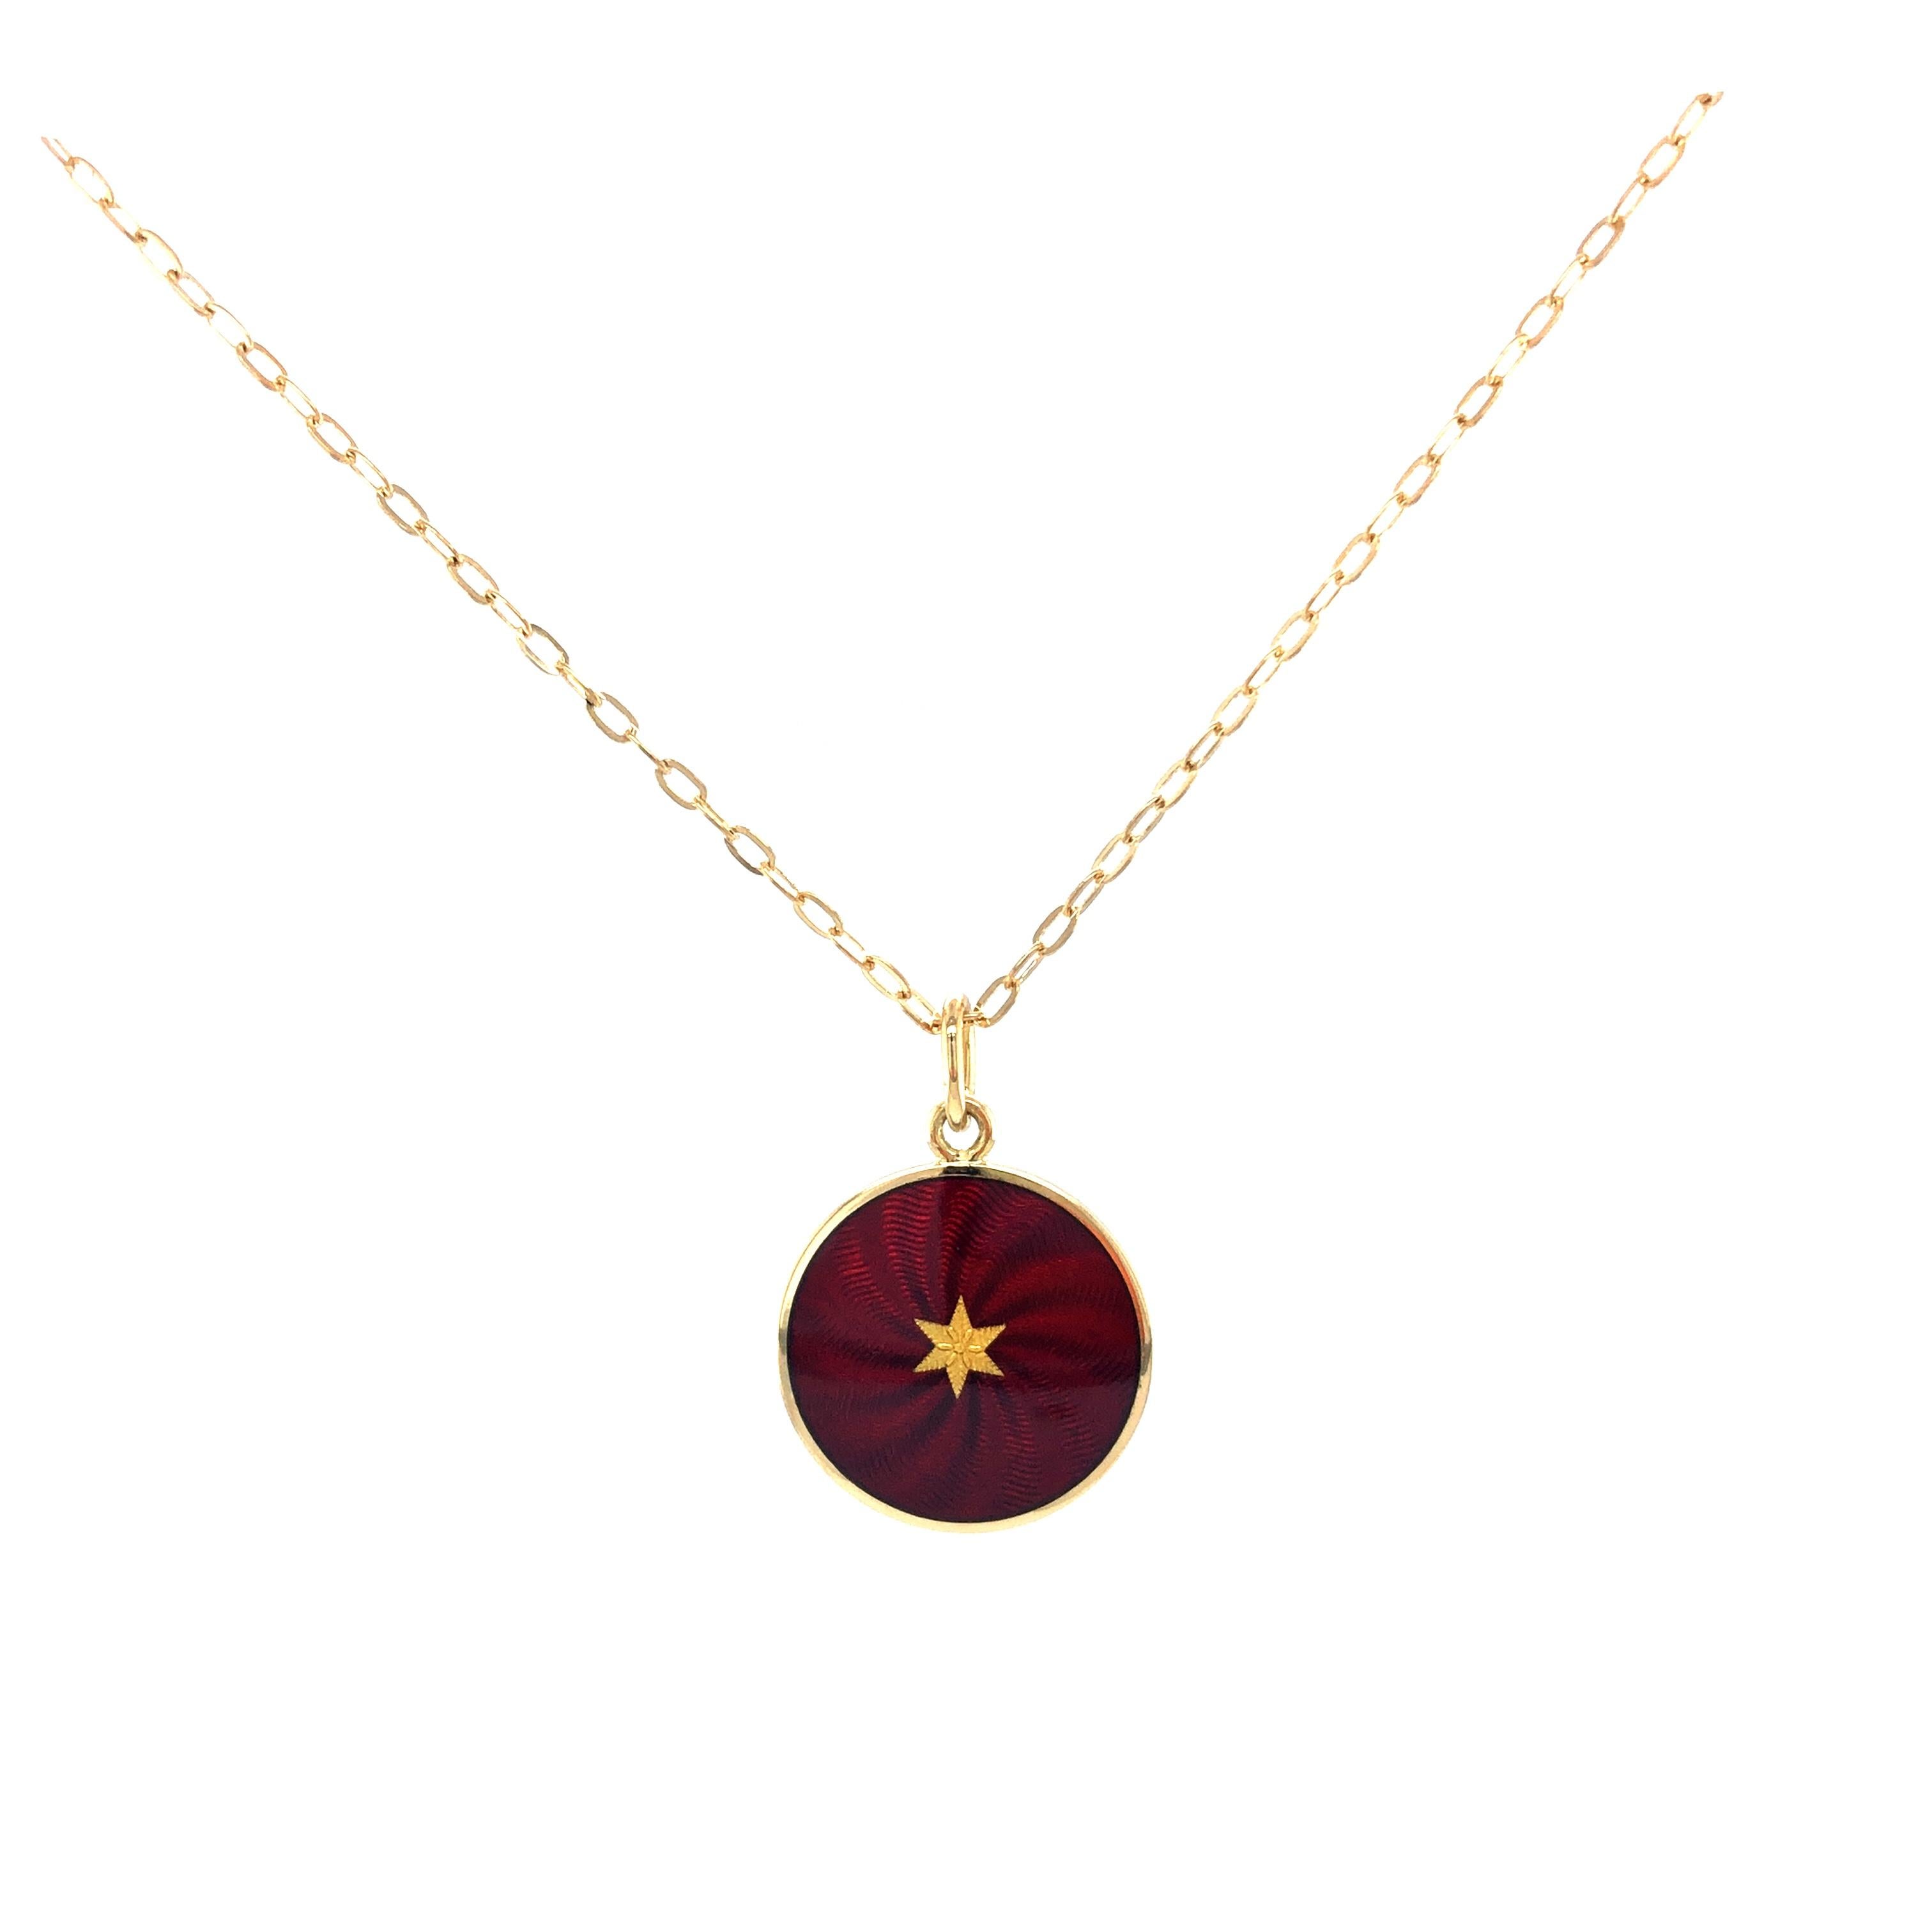 Round Disk Pendant Necklace - 18k Yellow Gold - Burgundy Red Enamel Guilloche  For Sale 2